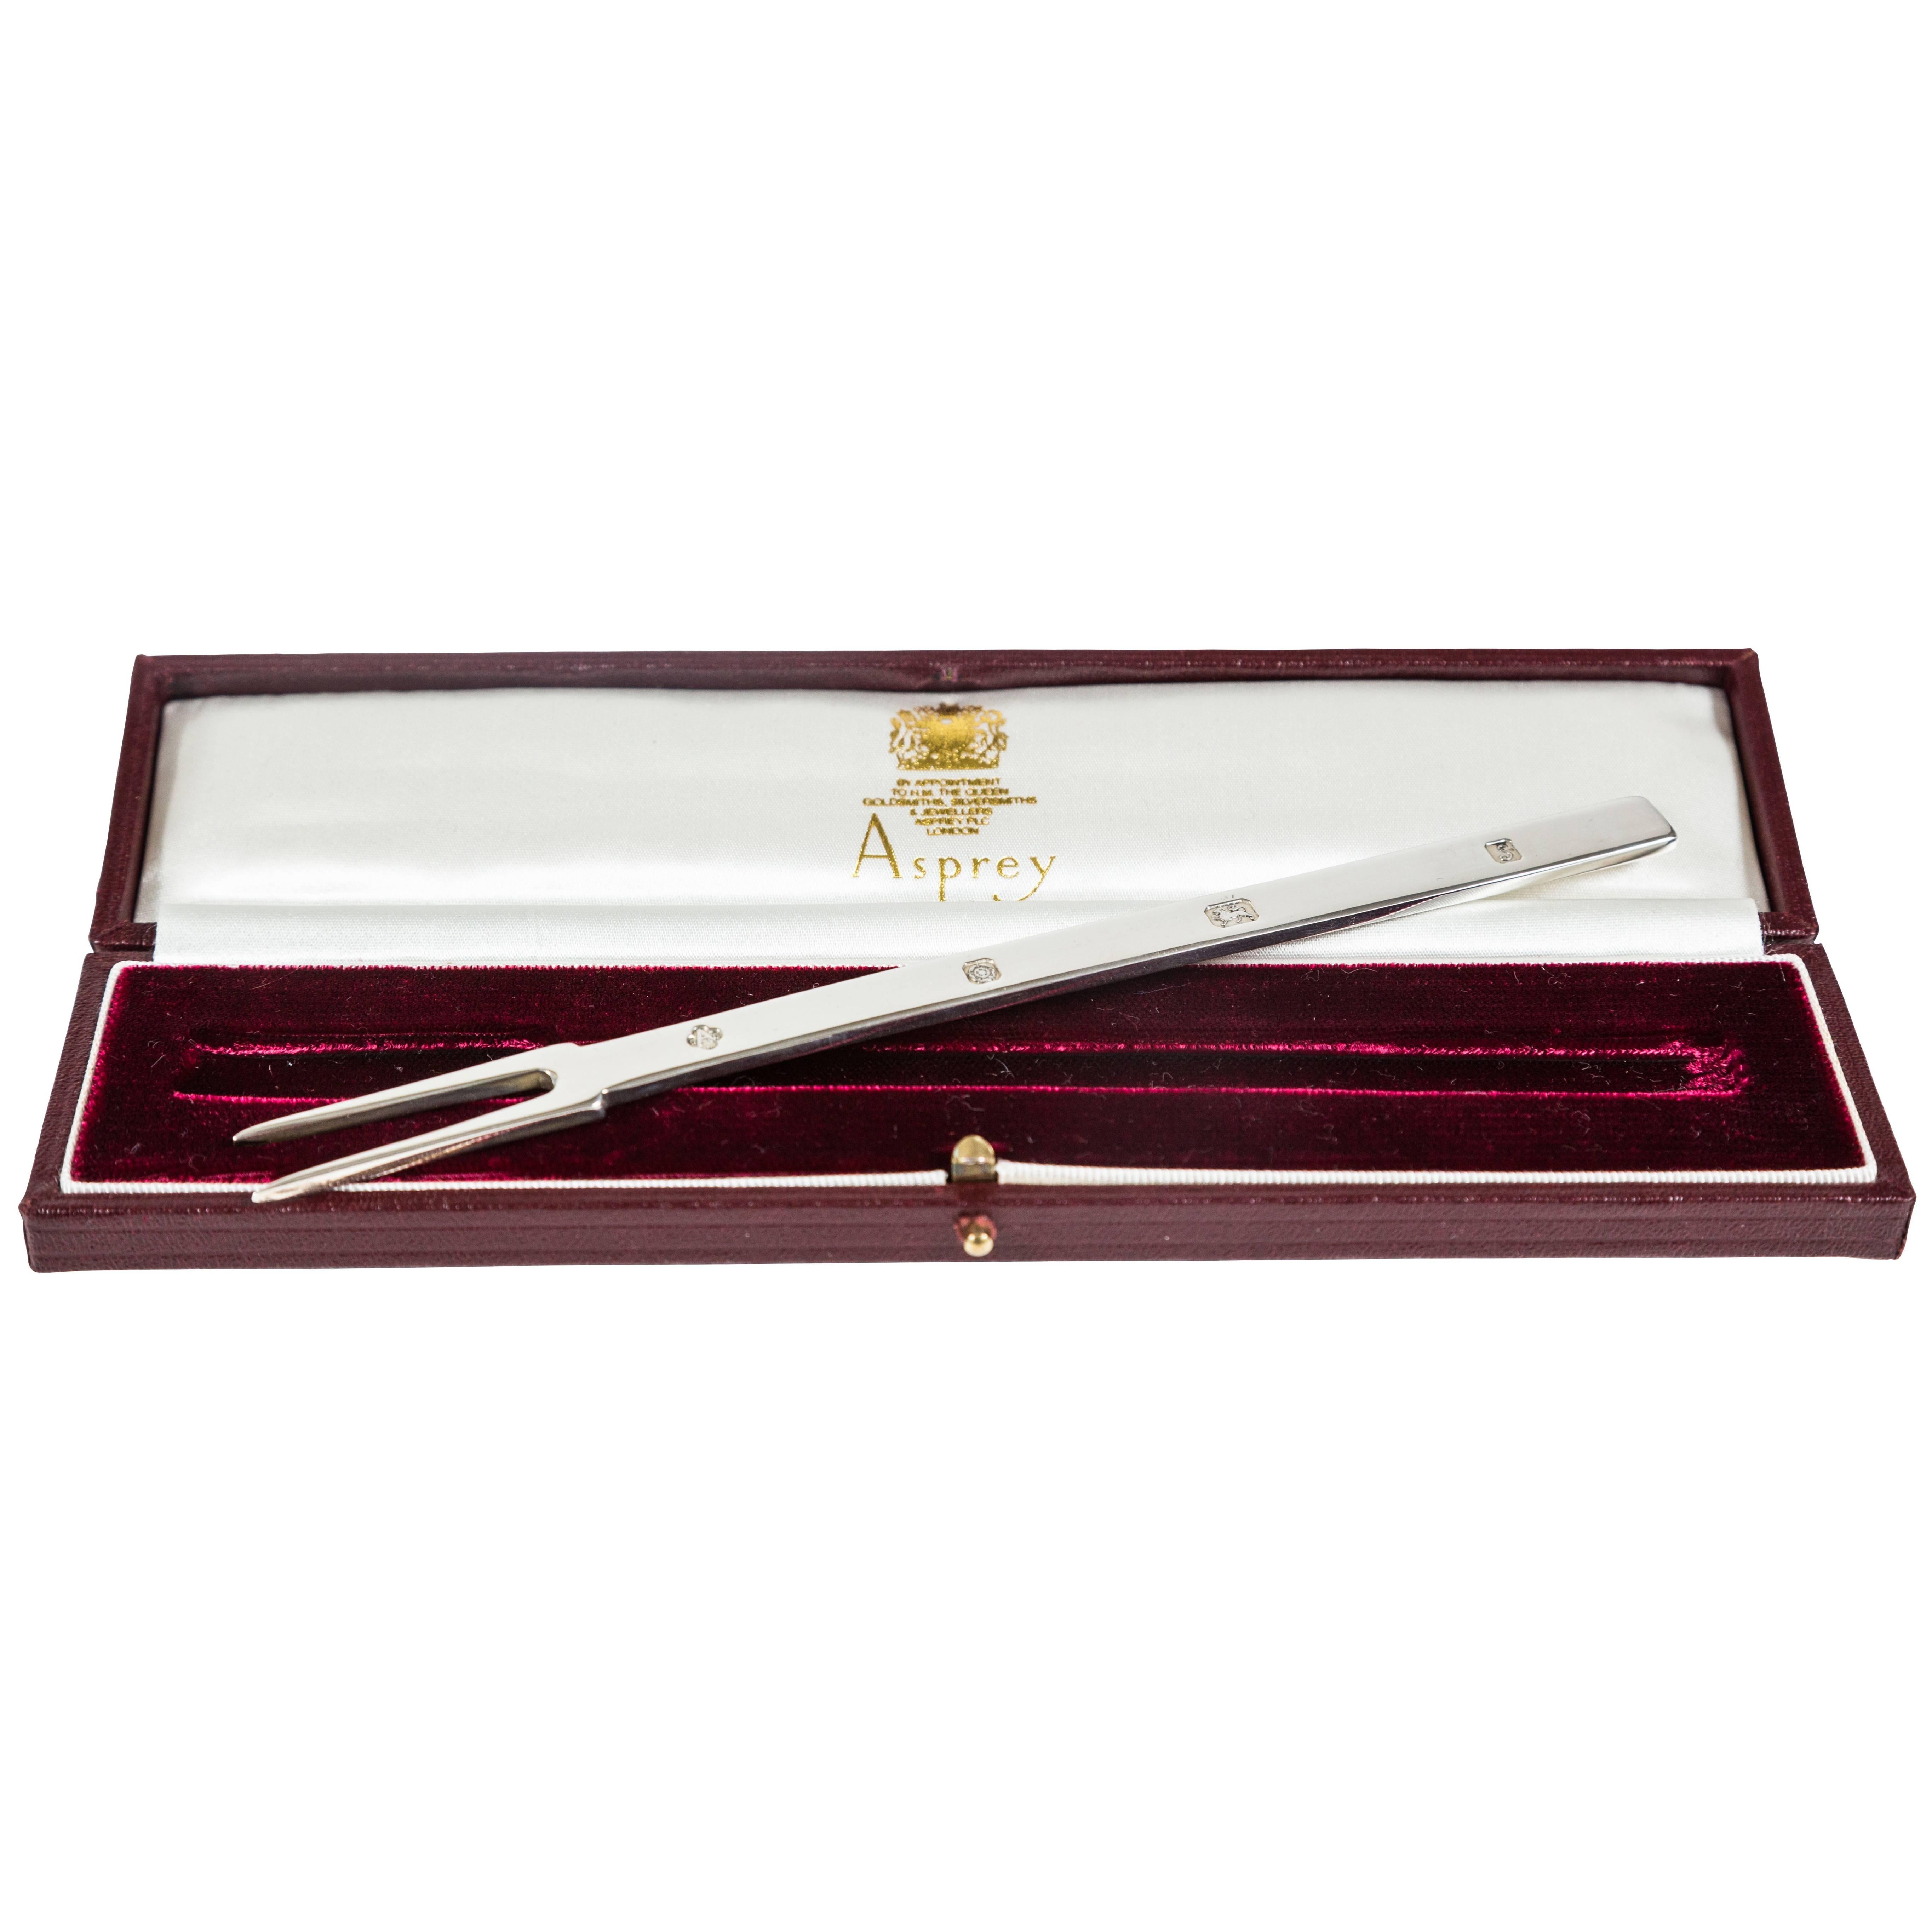 Silver Two-Pronged Puritan Manners Fork by Asprey London